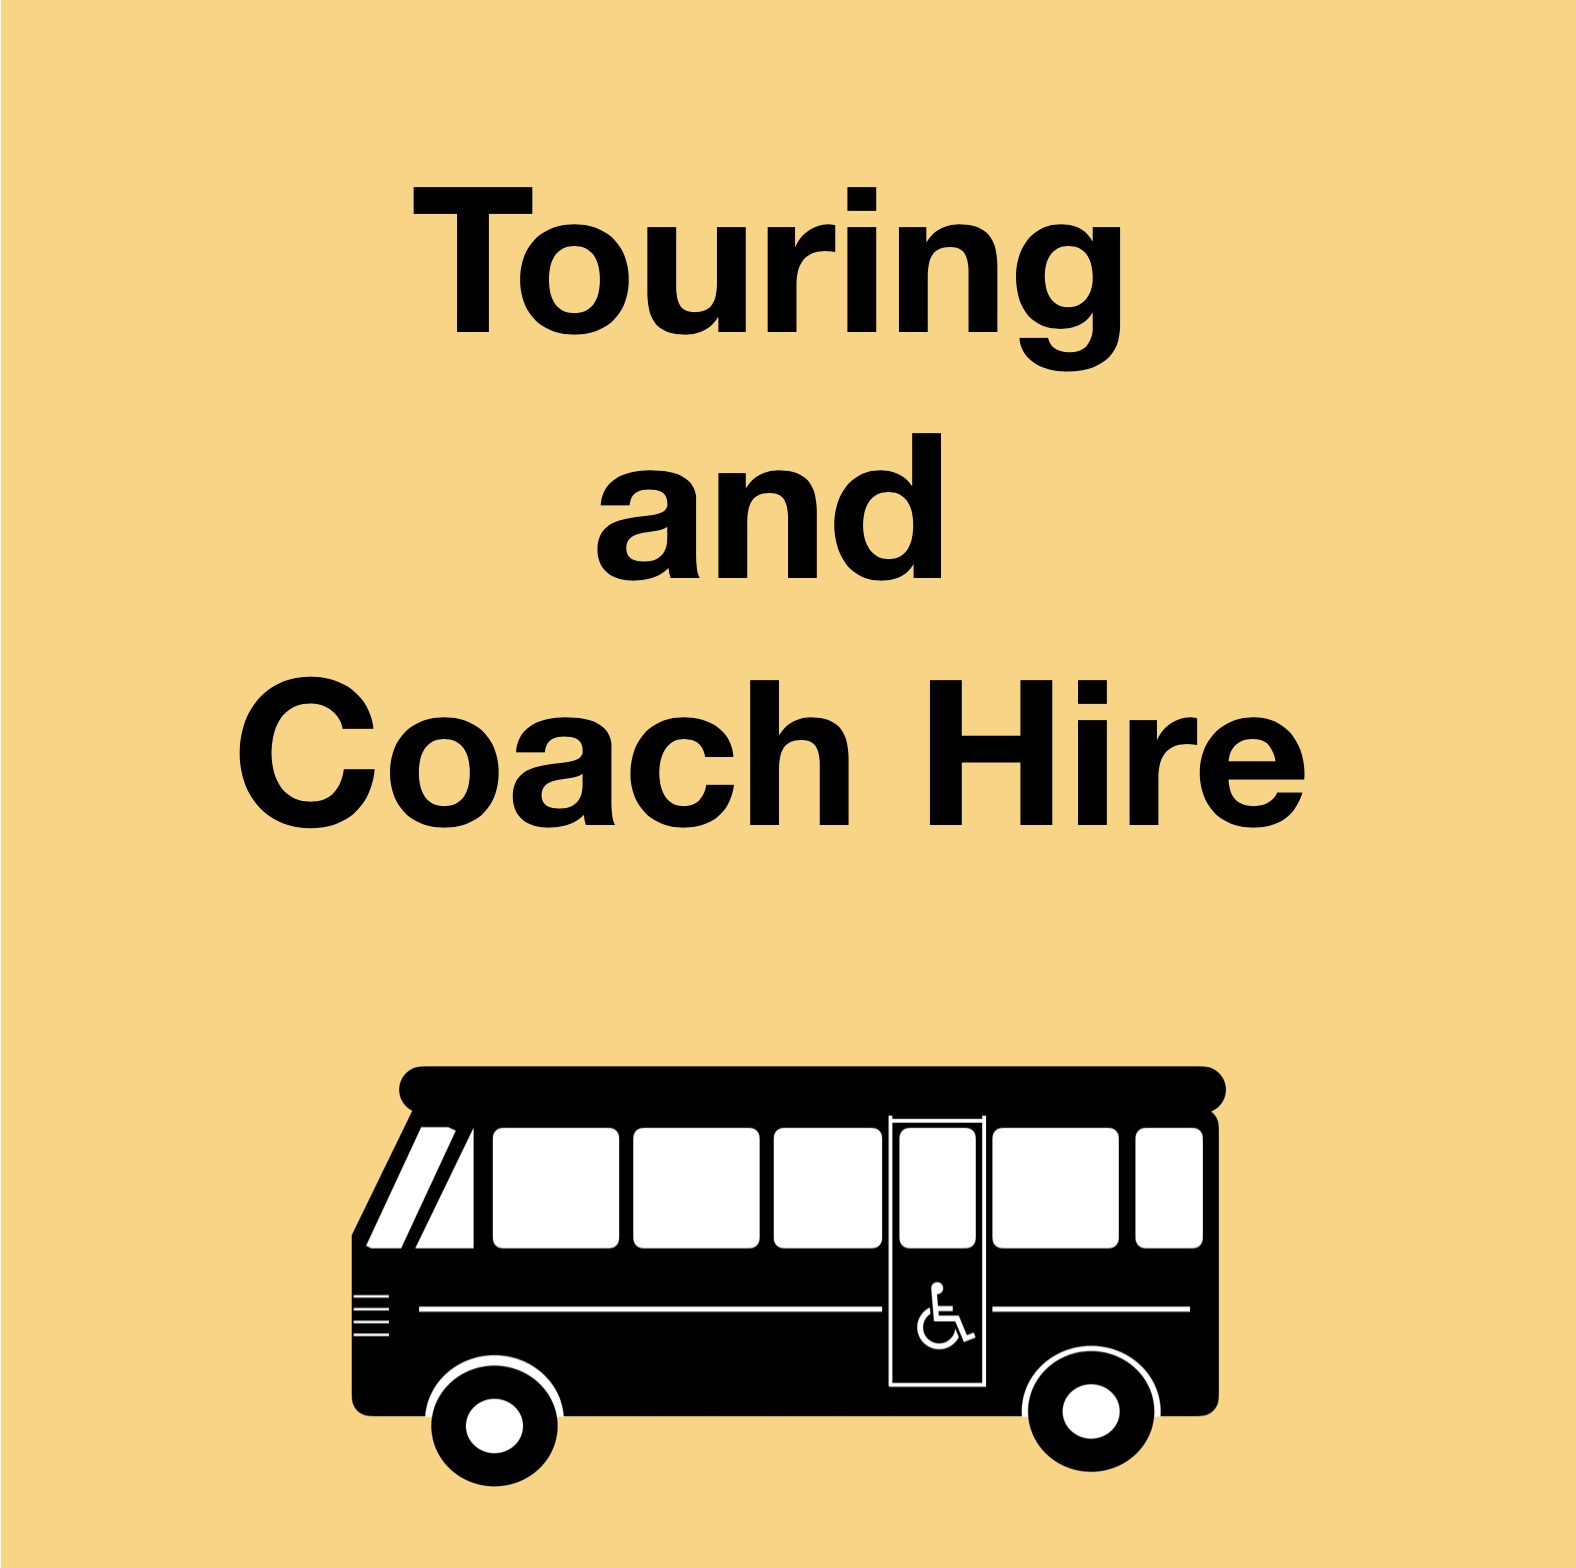 Touring and Coach Hire